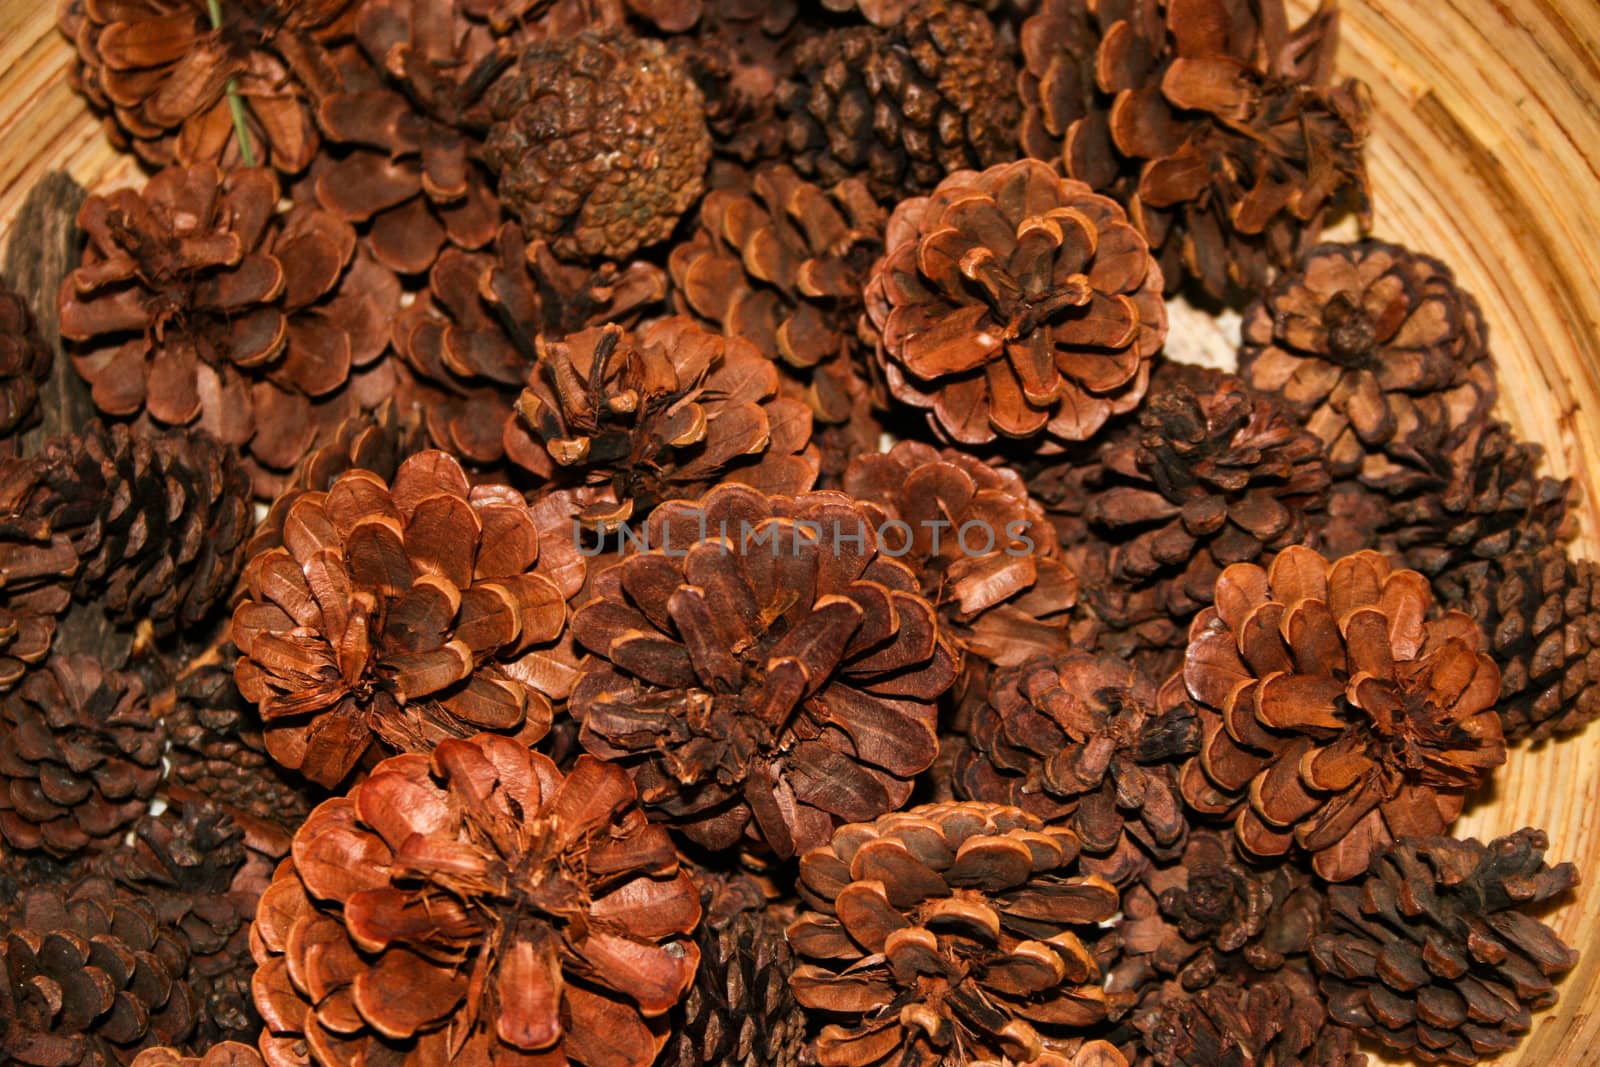 A group of pine cones in a wooden bowl